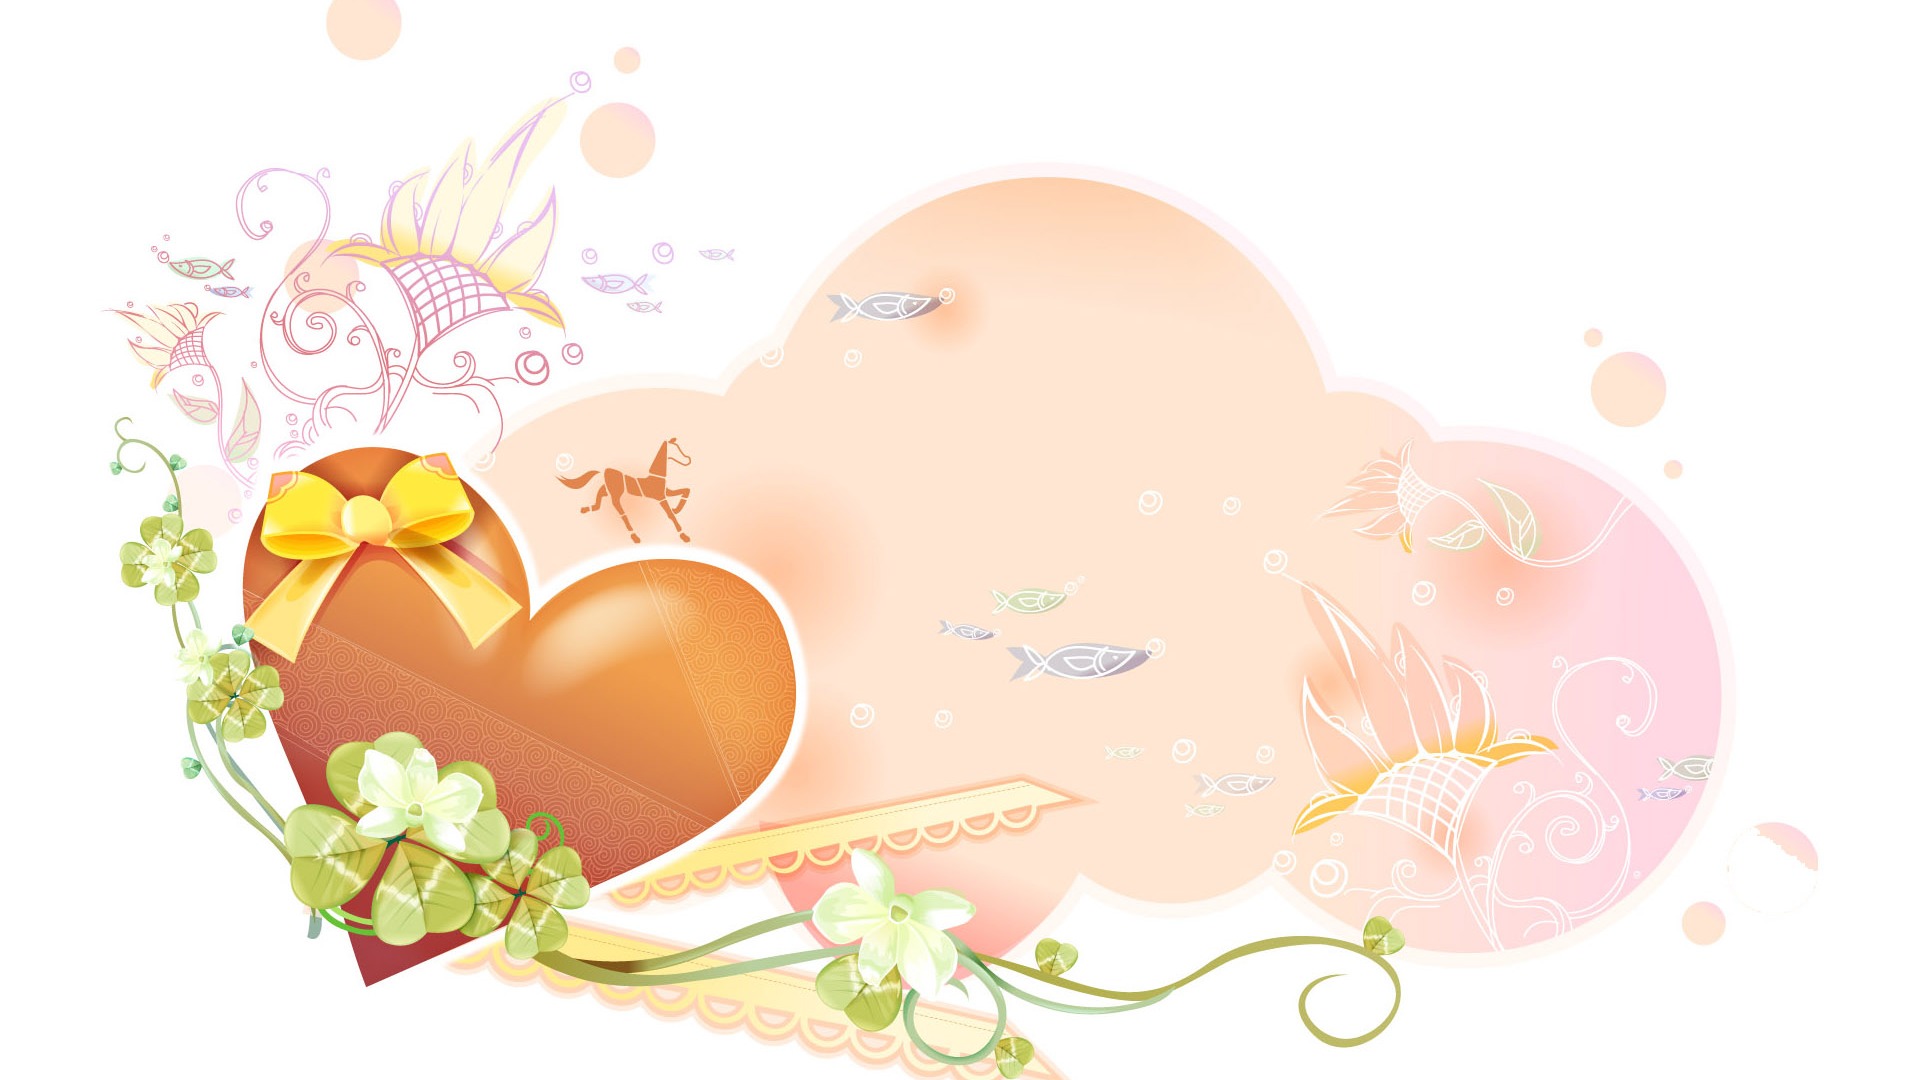 Valentine's Day Love Theme Wallpapers (3) #17 - 1920x1080